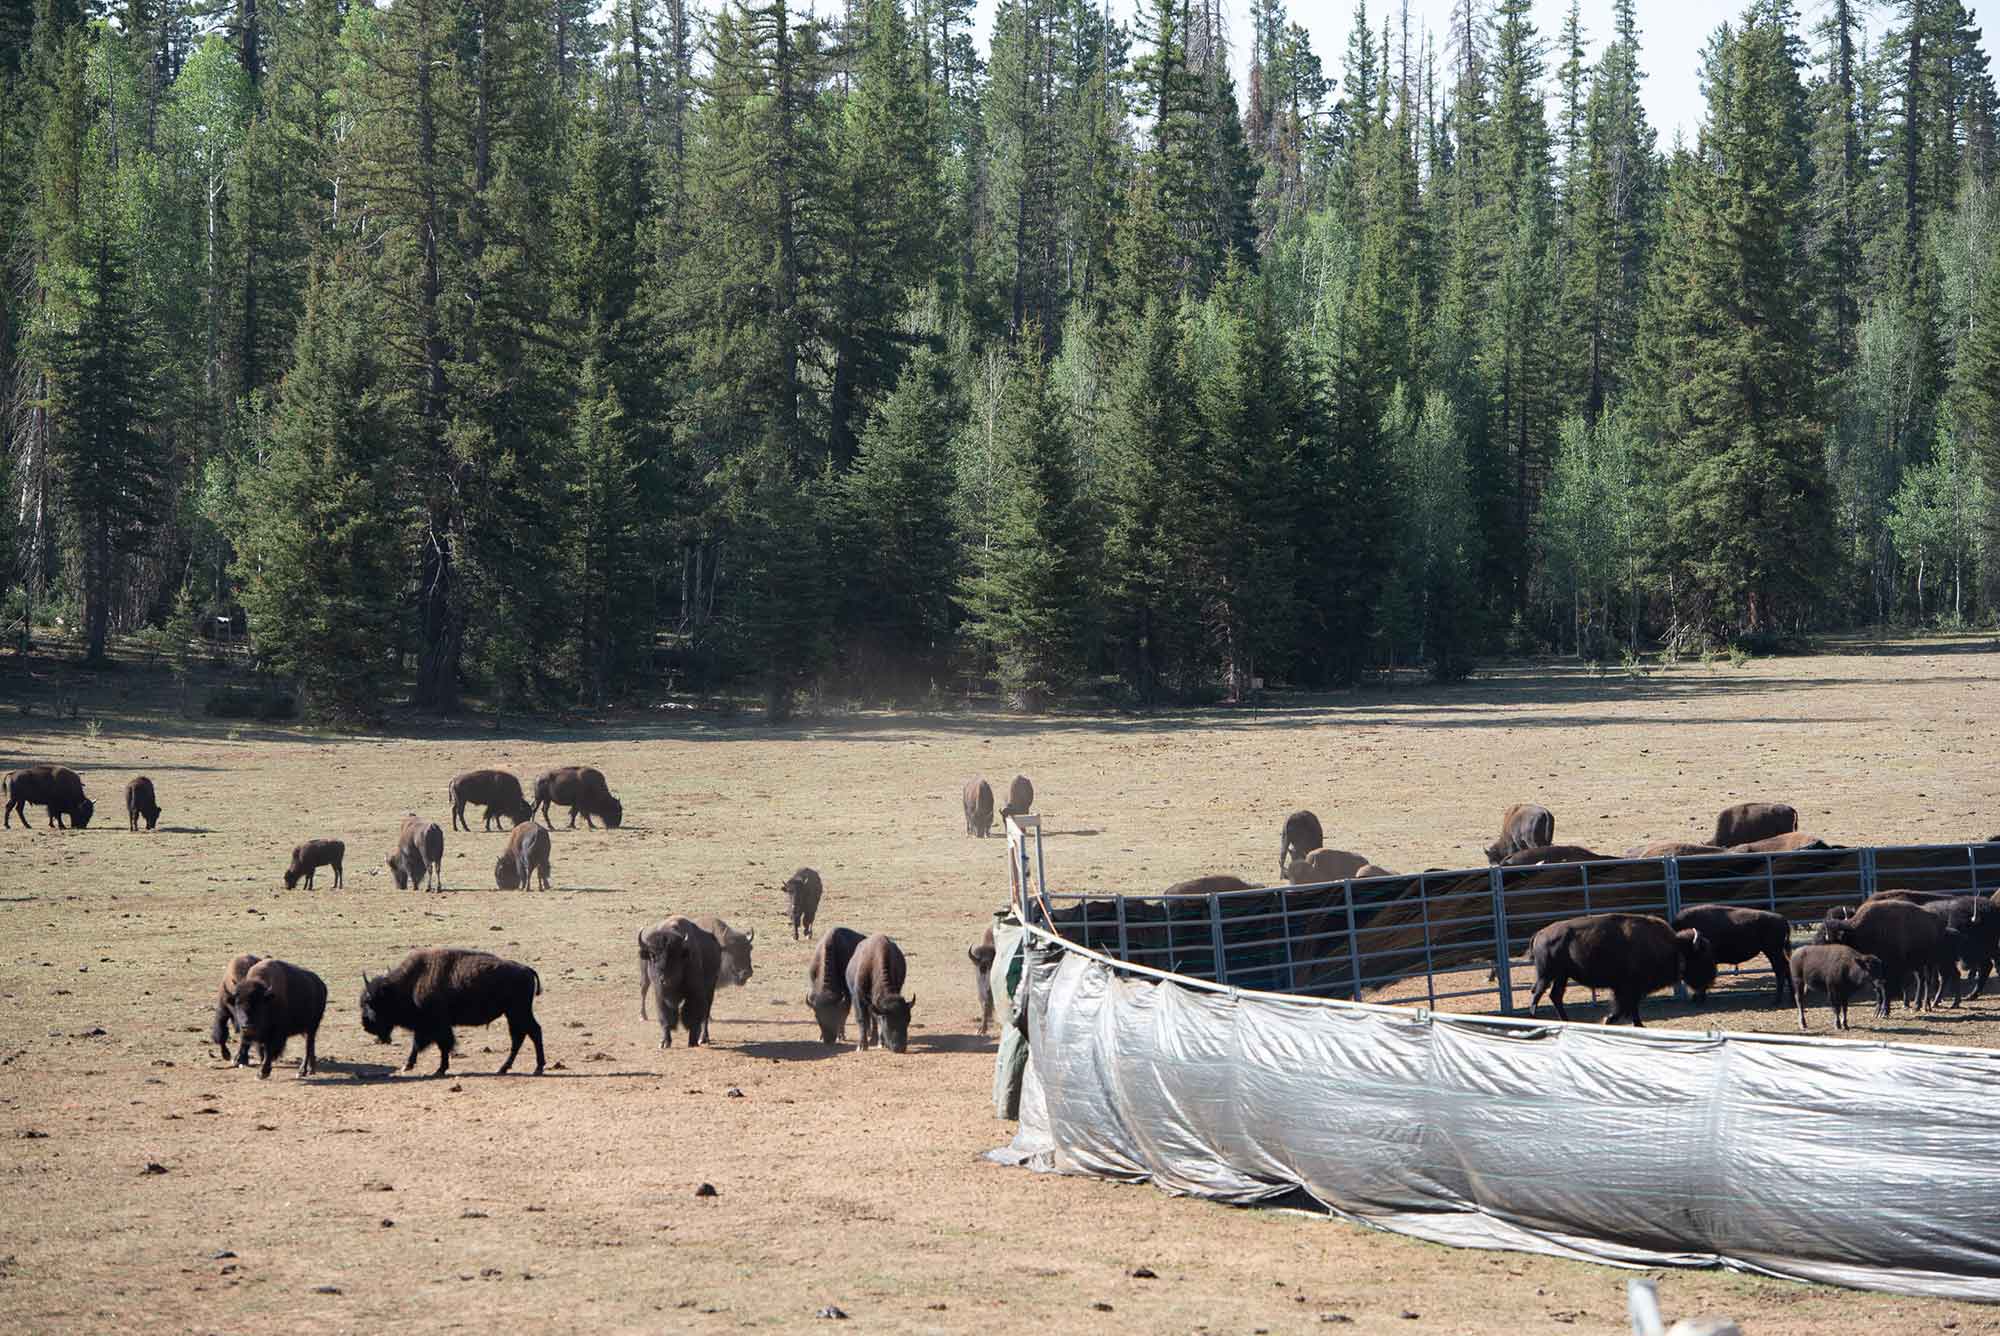 Relocated 57 bison from the North Rim.